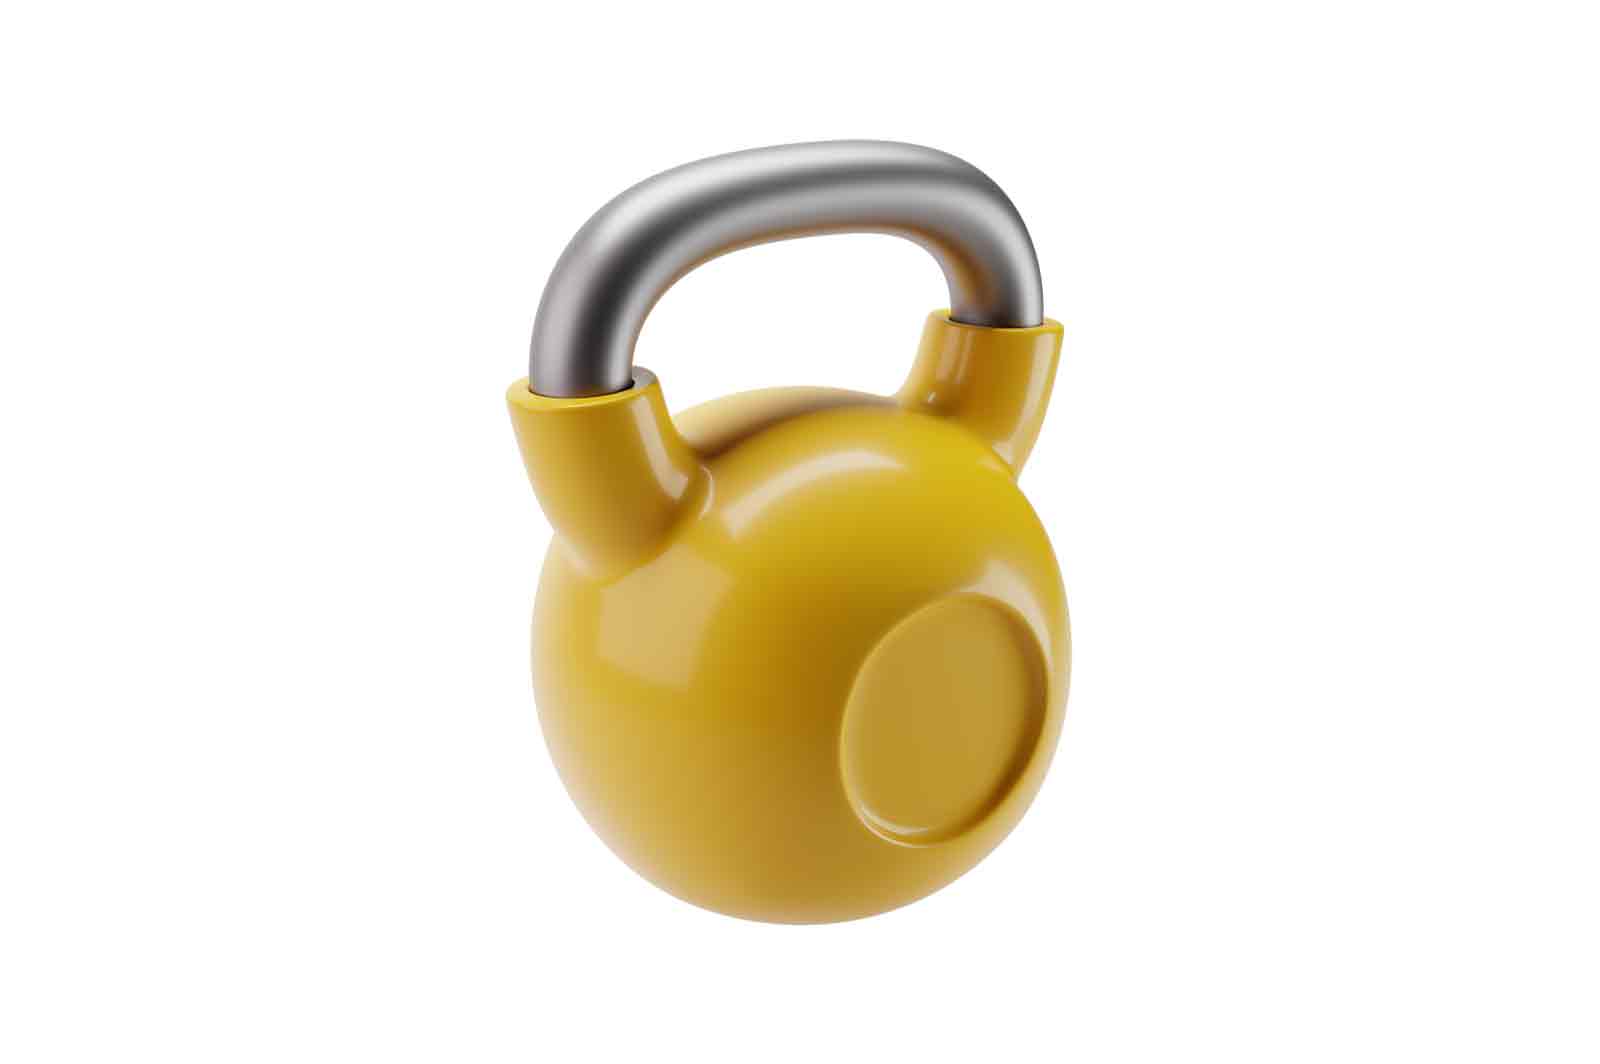 Kettlebell with handle 3d rendered illustration. Equipment for bodybuilding and workout. Sports workout tools